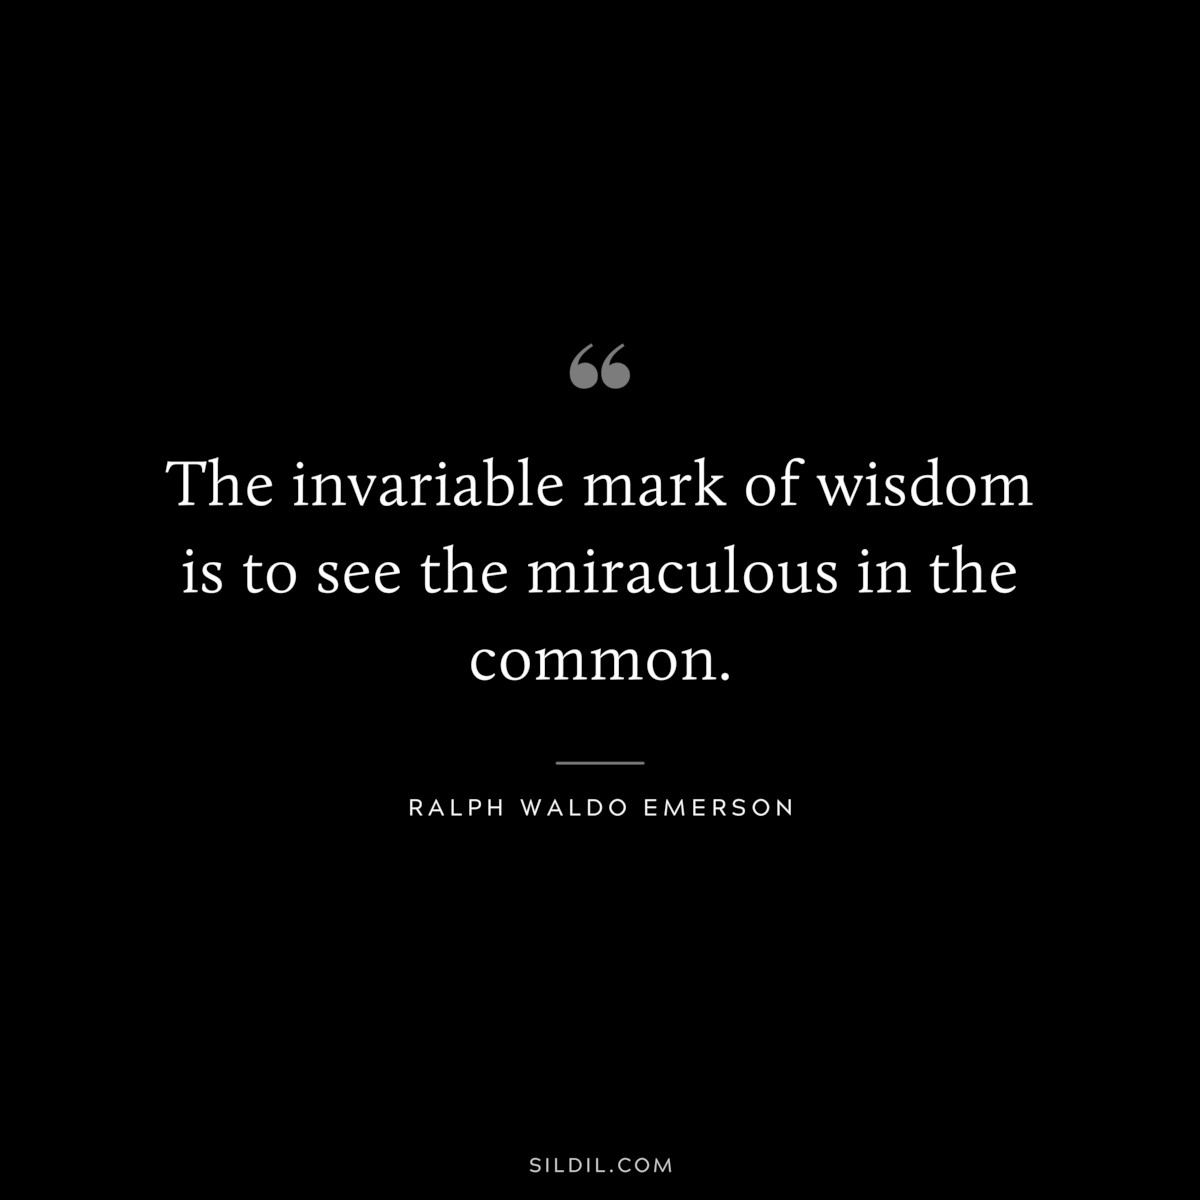 The invariable mark of wisdom is to see the miraculous in the common. ― Ralph Waldo Emerson